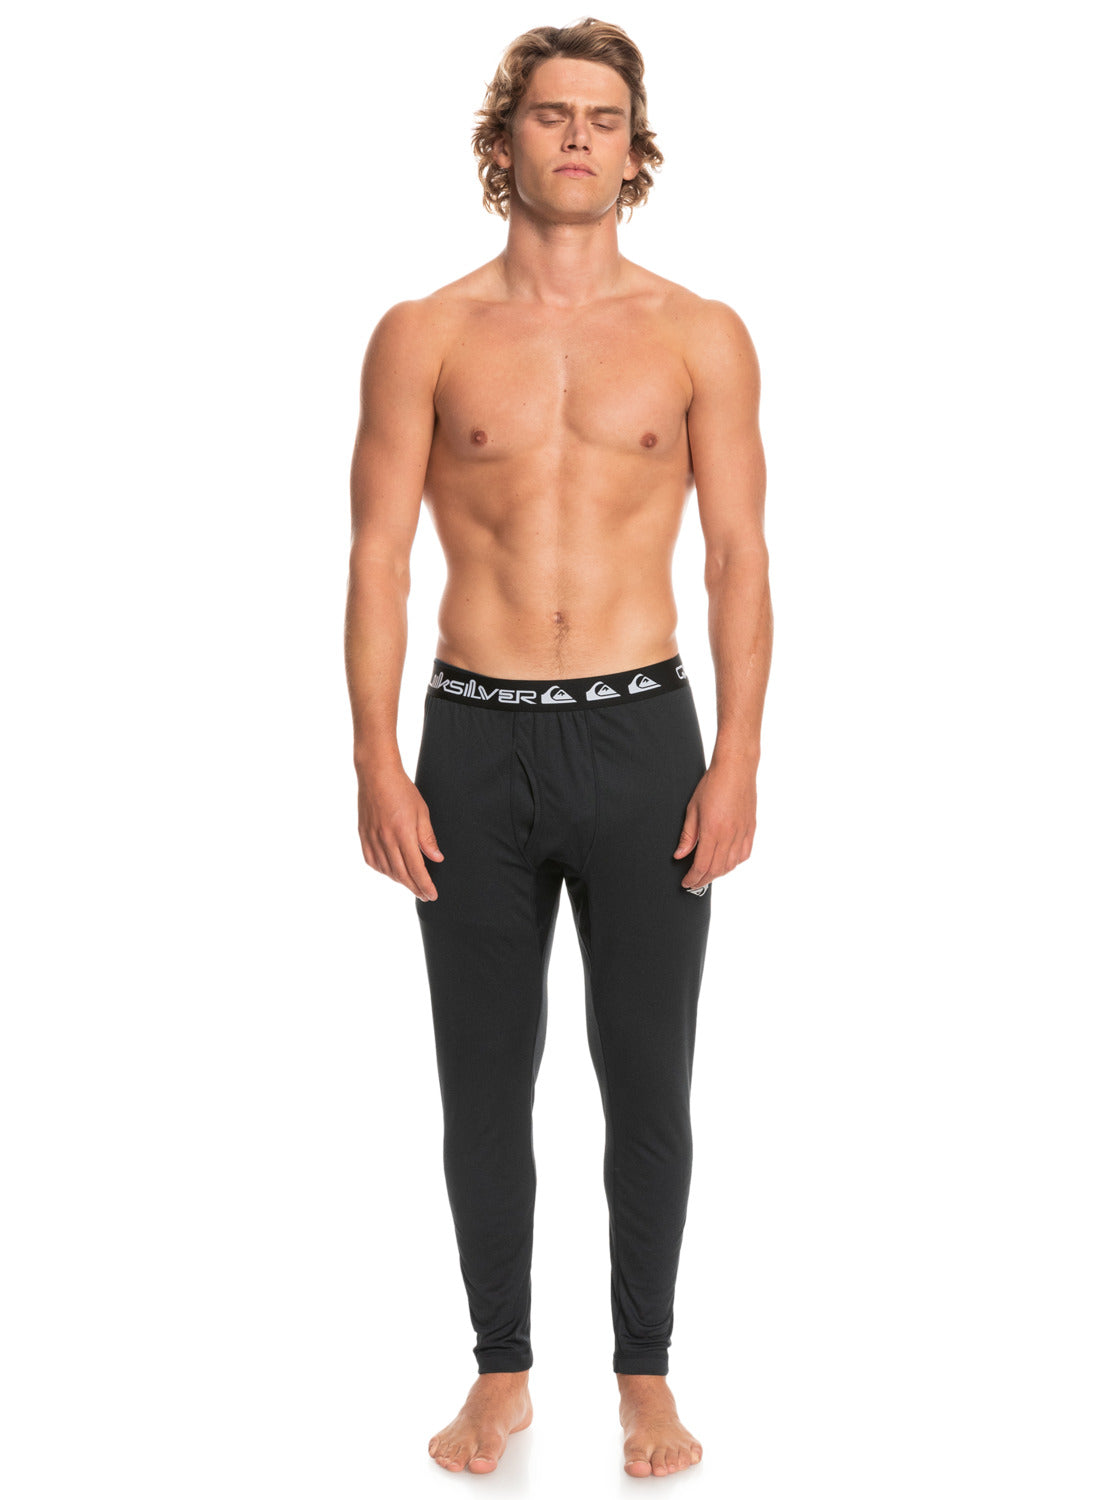 Territory Layer - Technical Base Layer Bottoms for Men